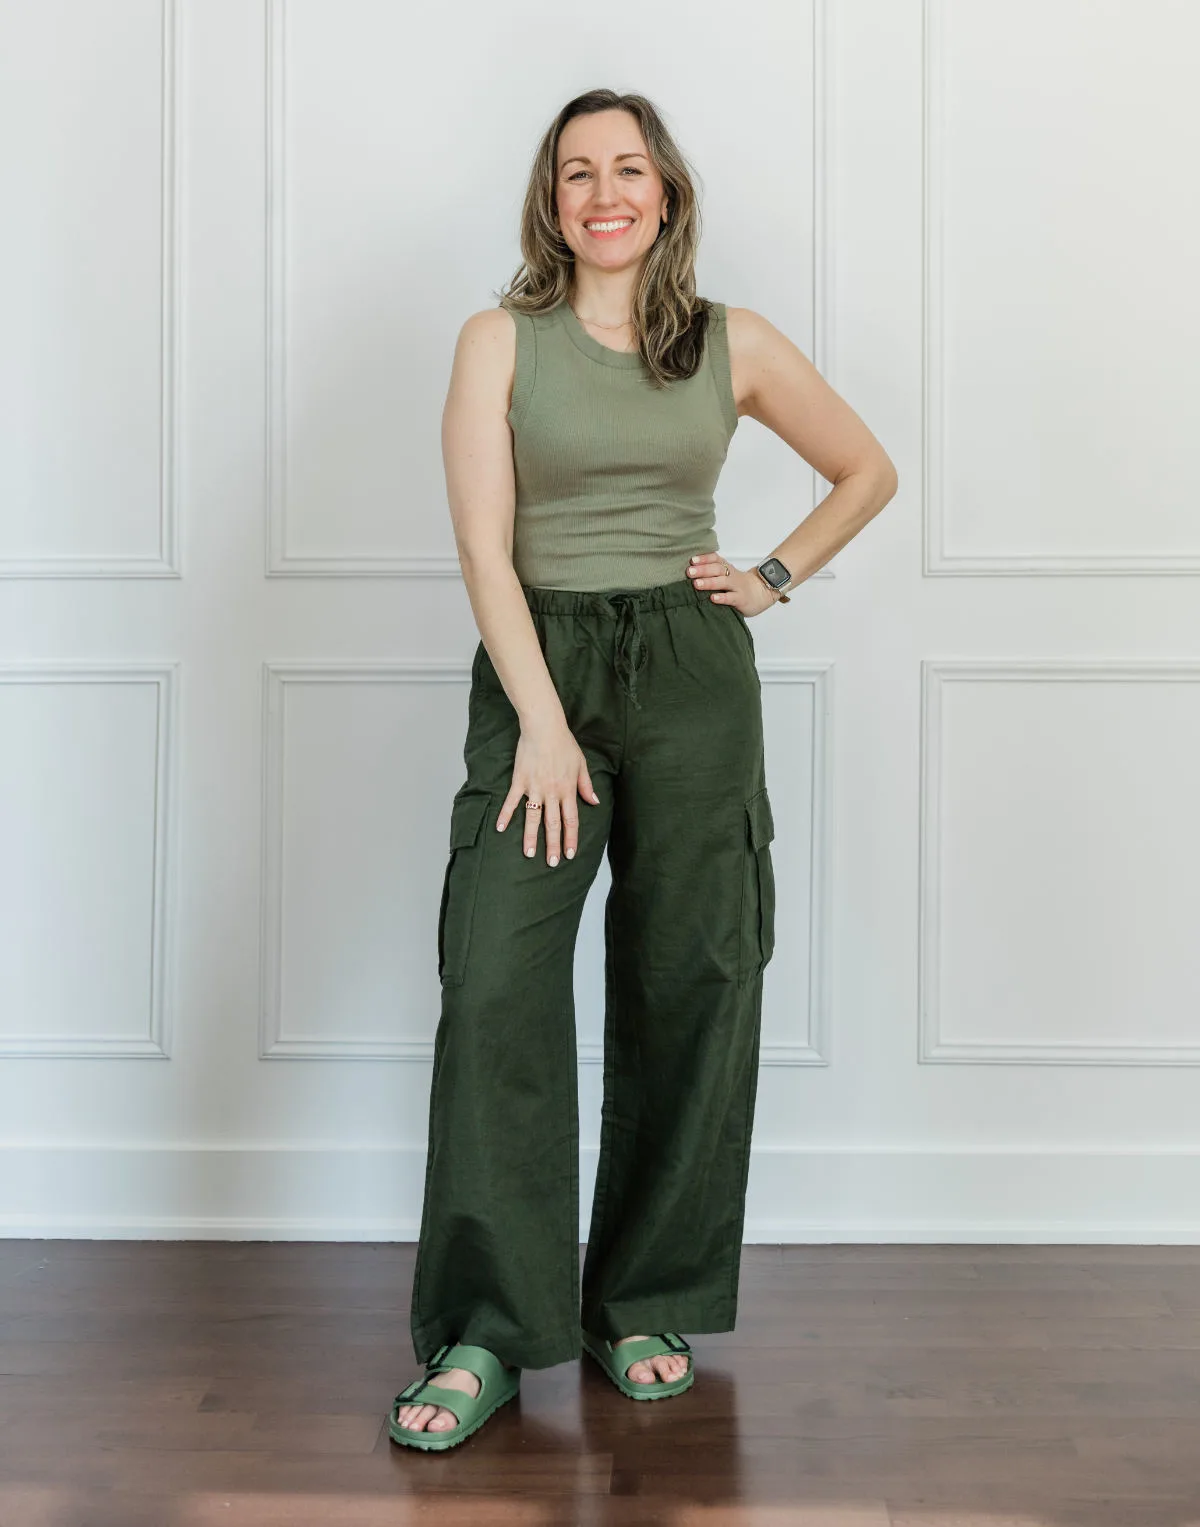 Woman wearing a light green tank top, olive green linen pants and green Birkenstock style sandals.